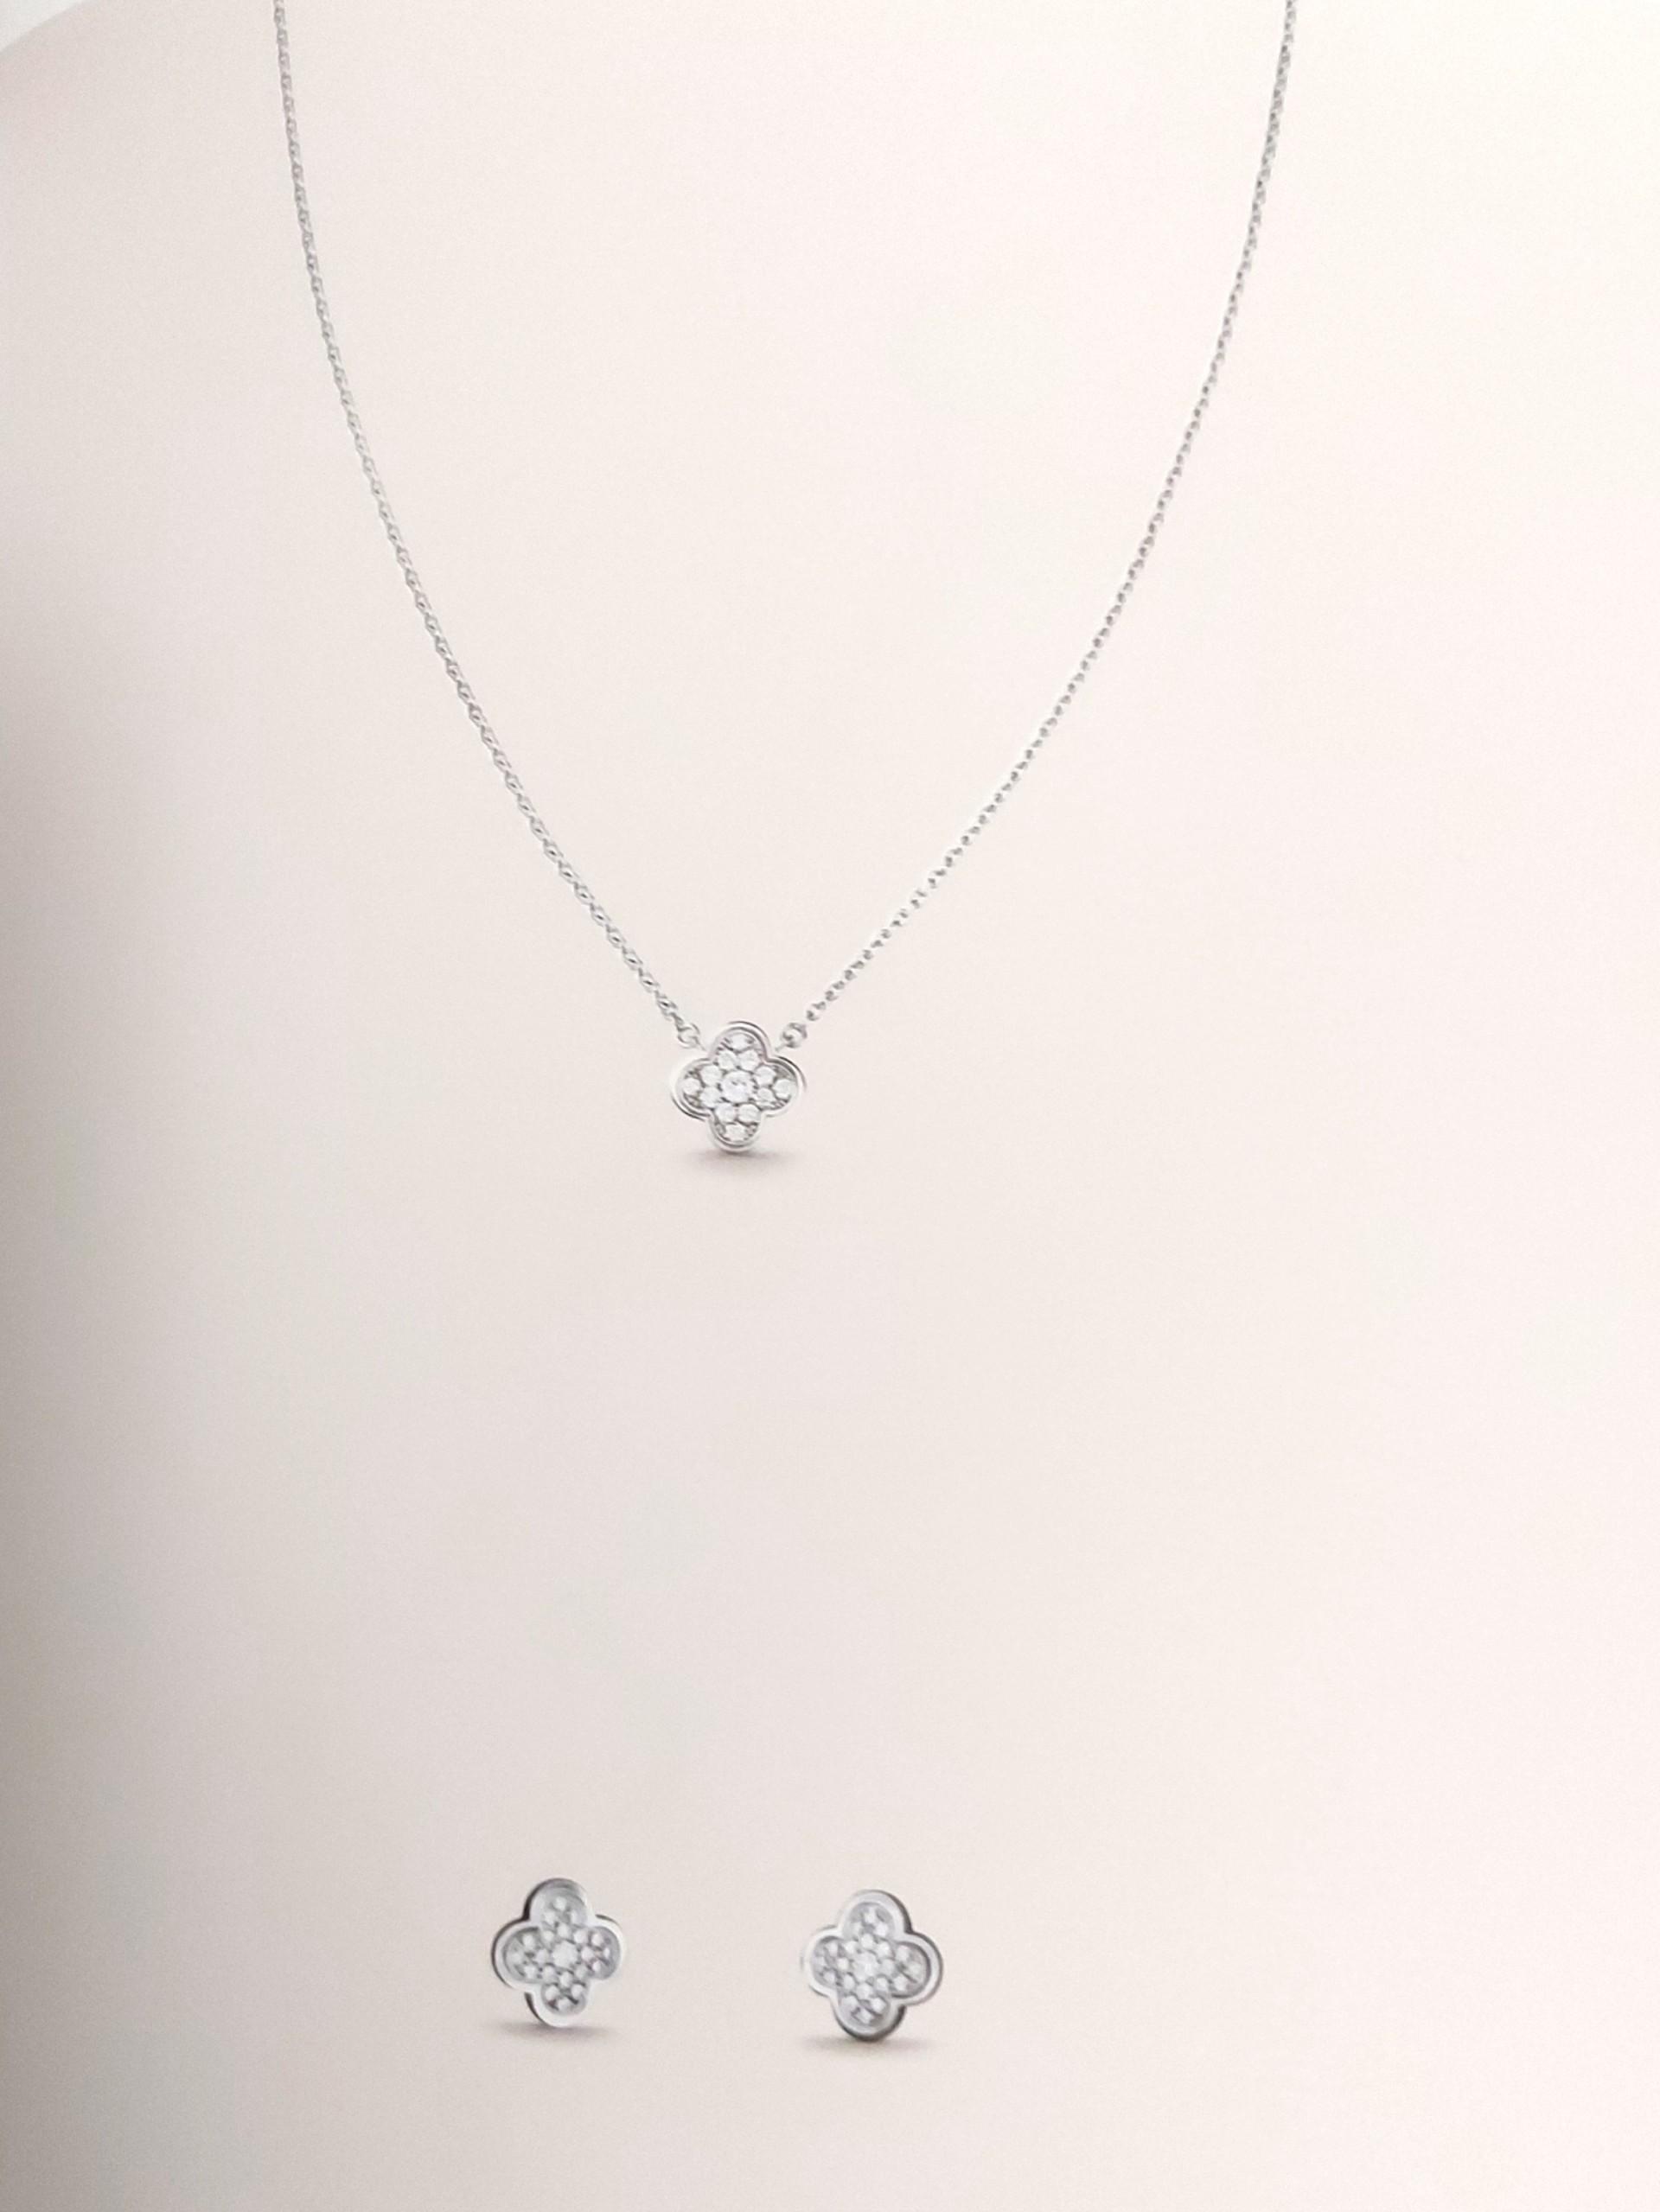 Idylle Blossom Transformable Pendant, White Gold And Diamonds - Categories